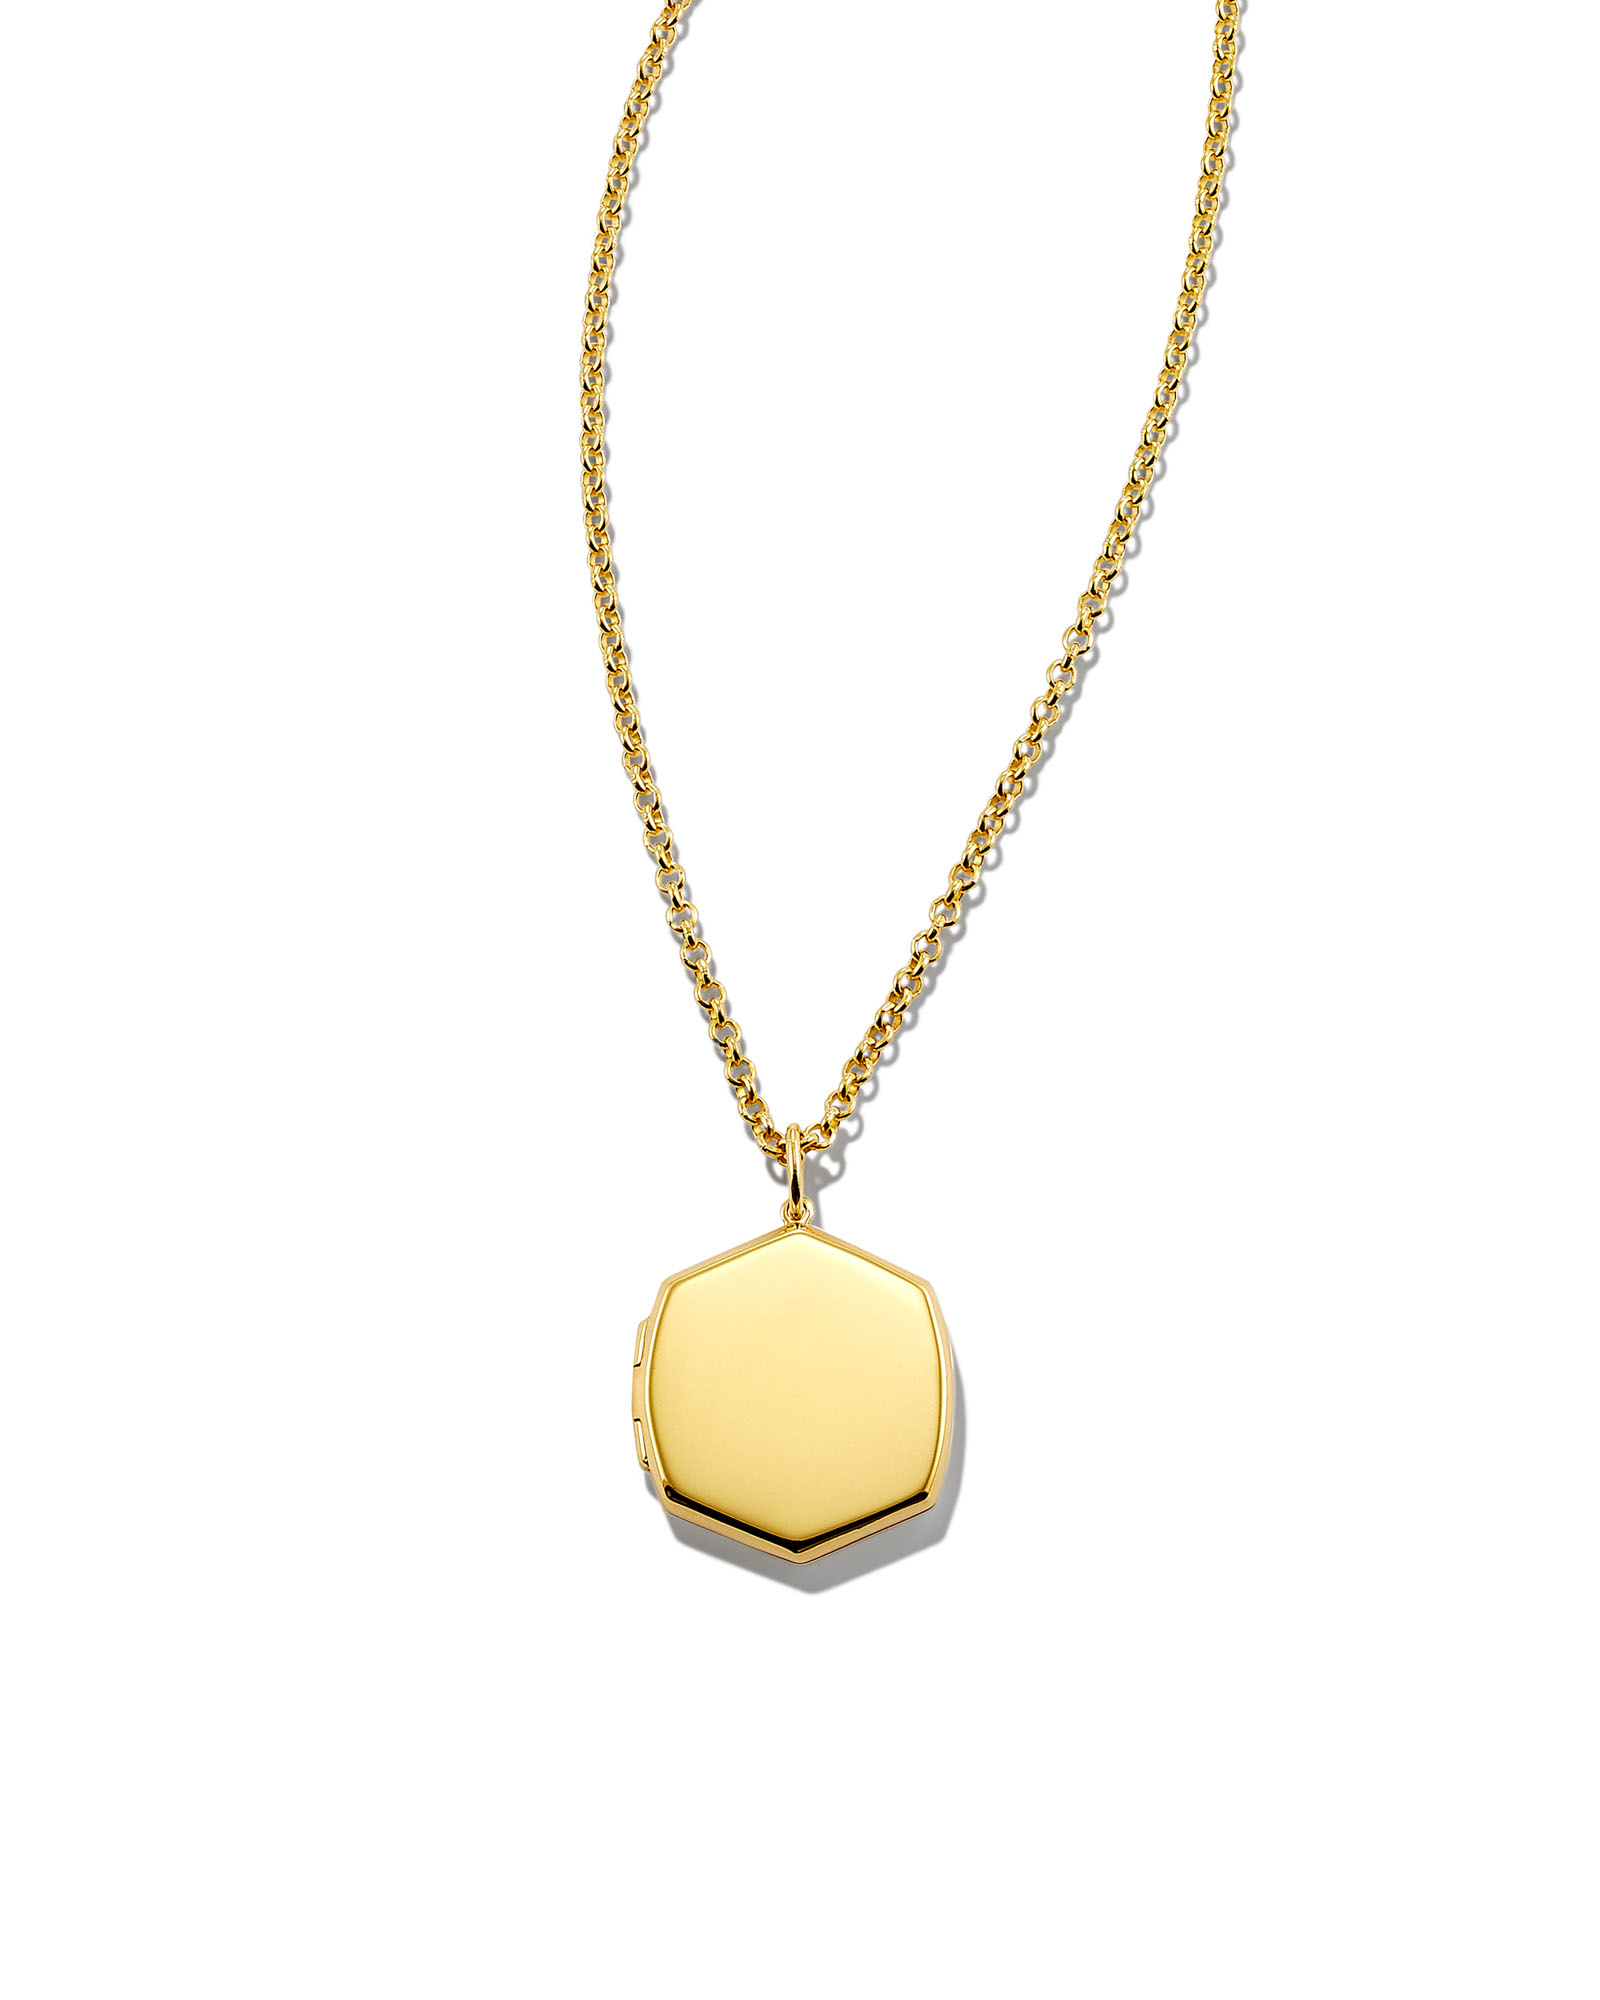 Buy Small Round Gold Locket Necklace Dainty Everyday Small Locket Necklace  Online in India - Etsy